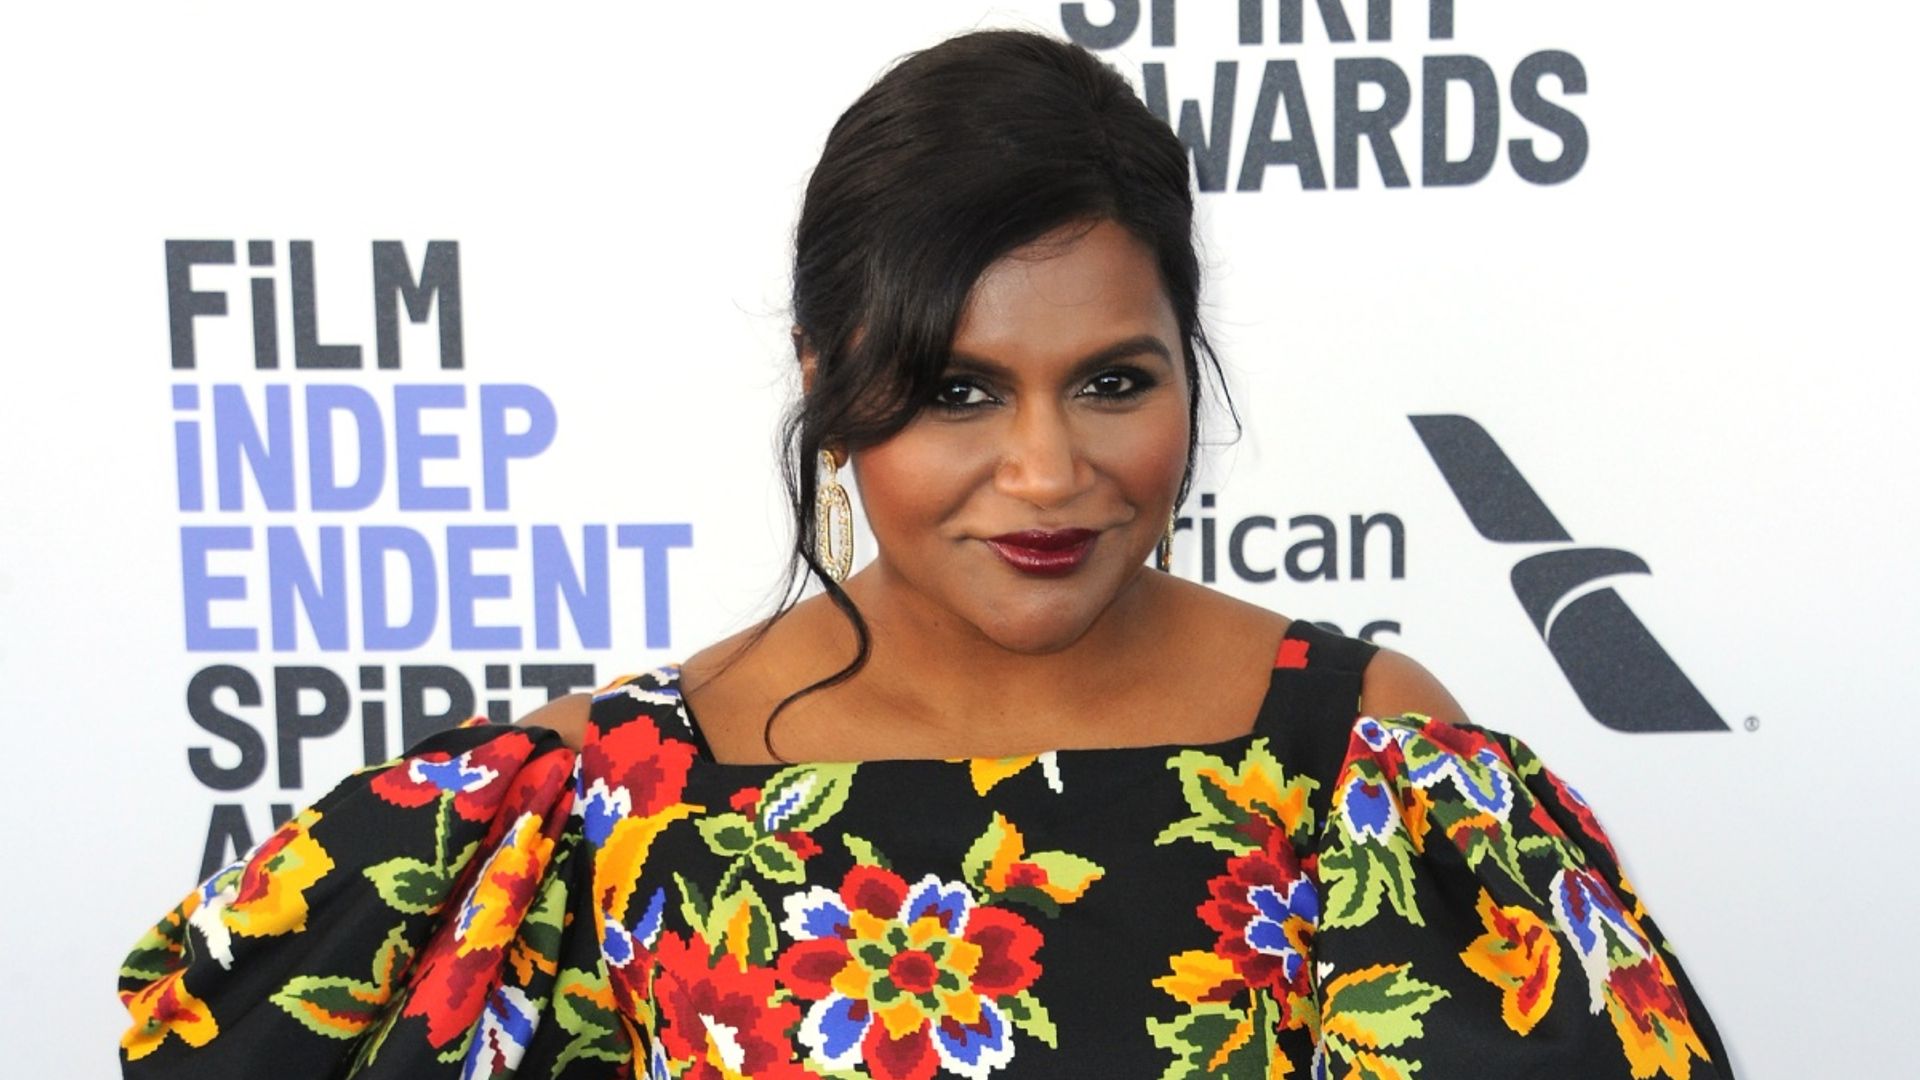 Mindy Kaling's rainbow walk-in wardrobe is too dreamy for words